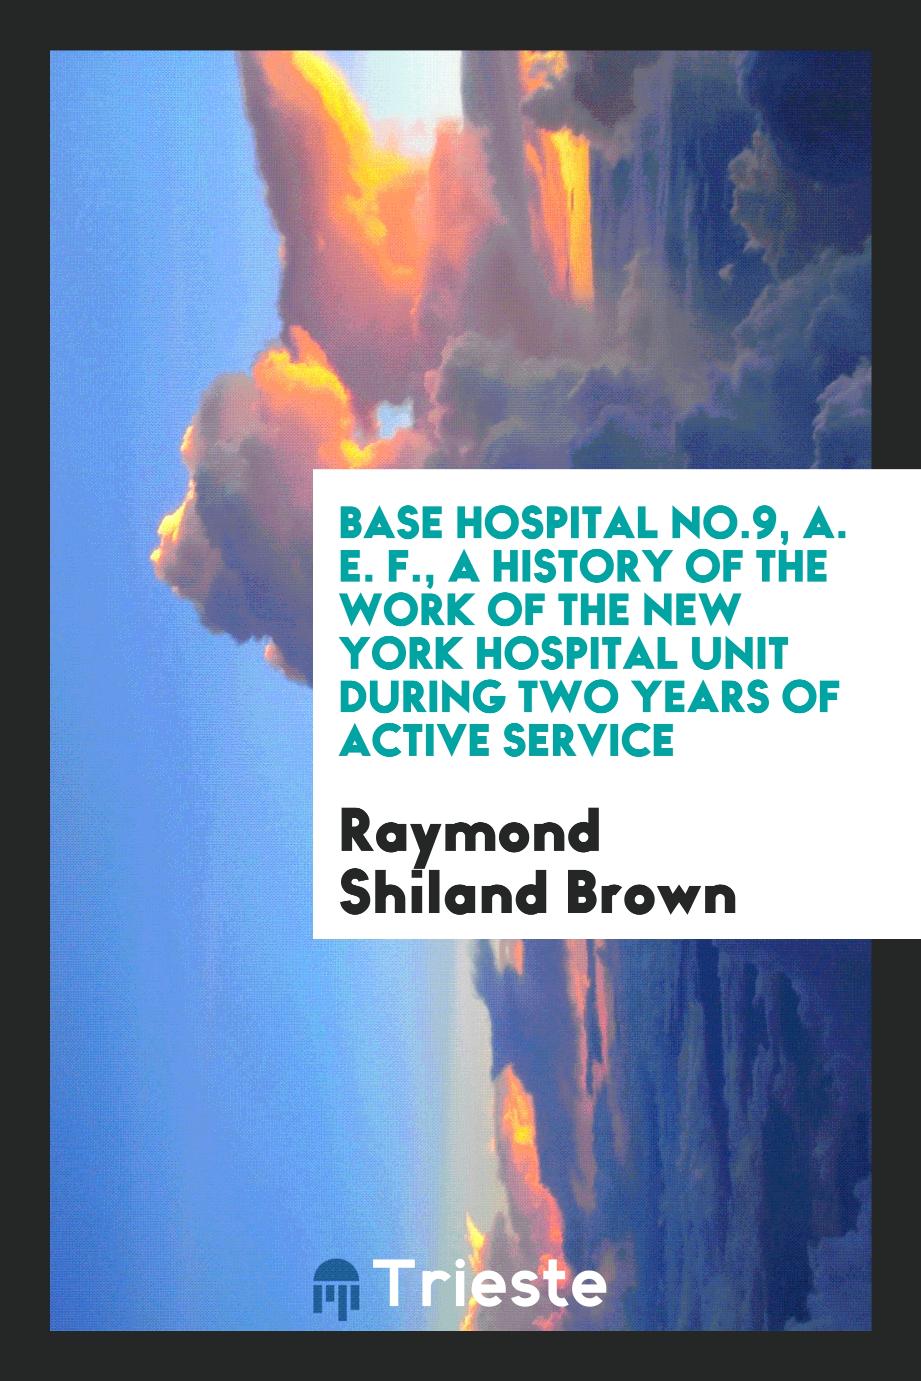 Base hospital No.9, A. E. F., a history of the work of the New York hospital unit during two years of active service